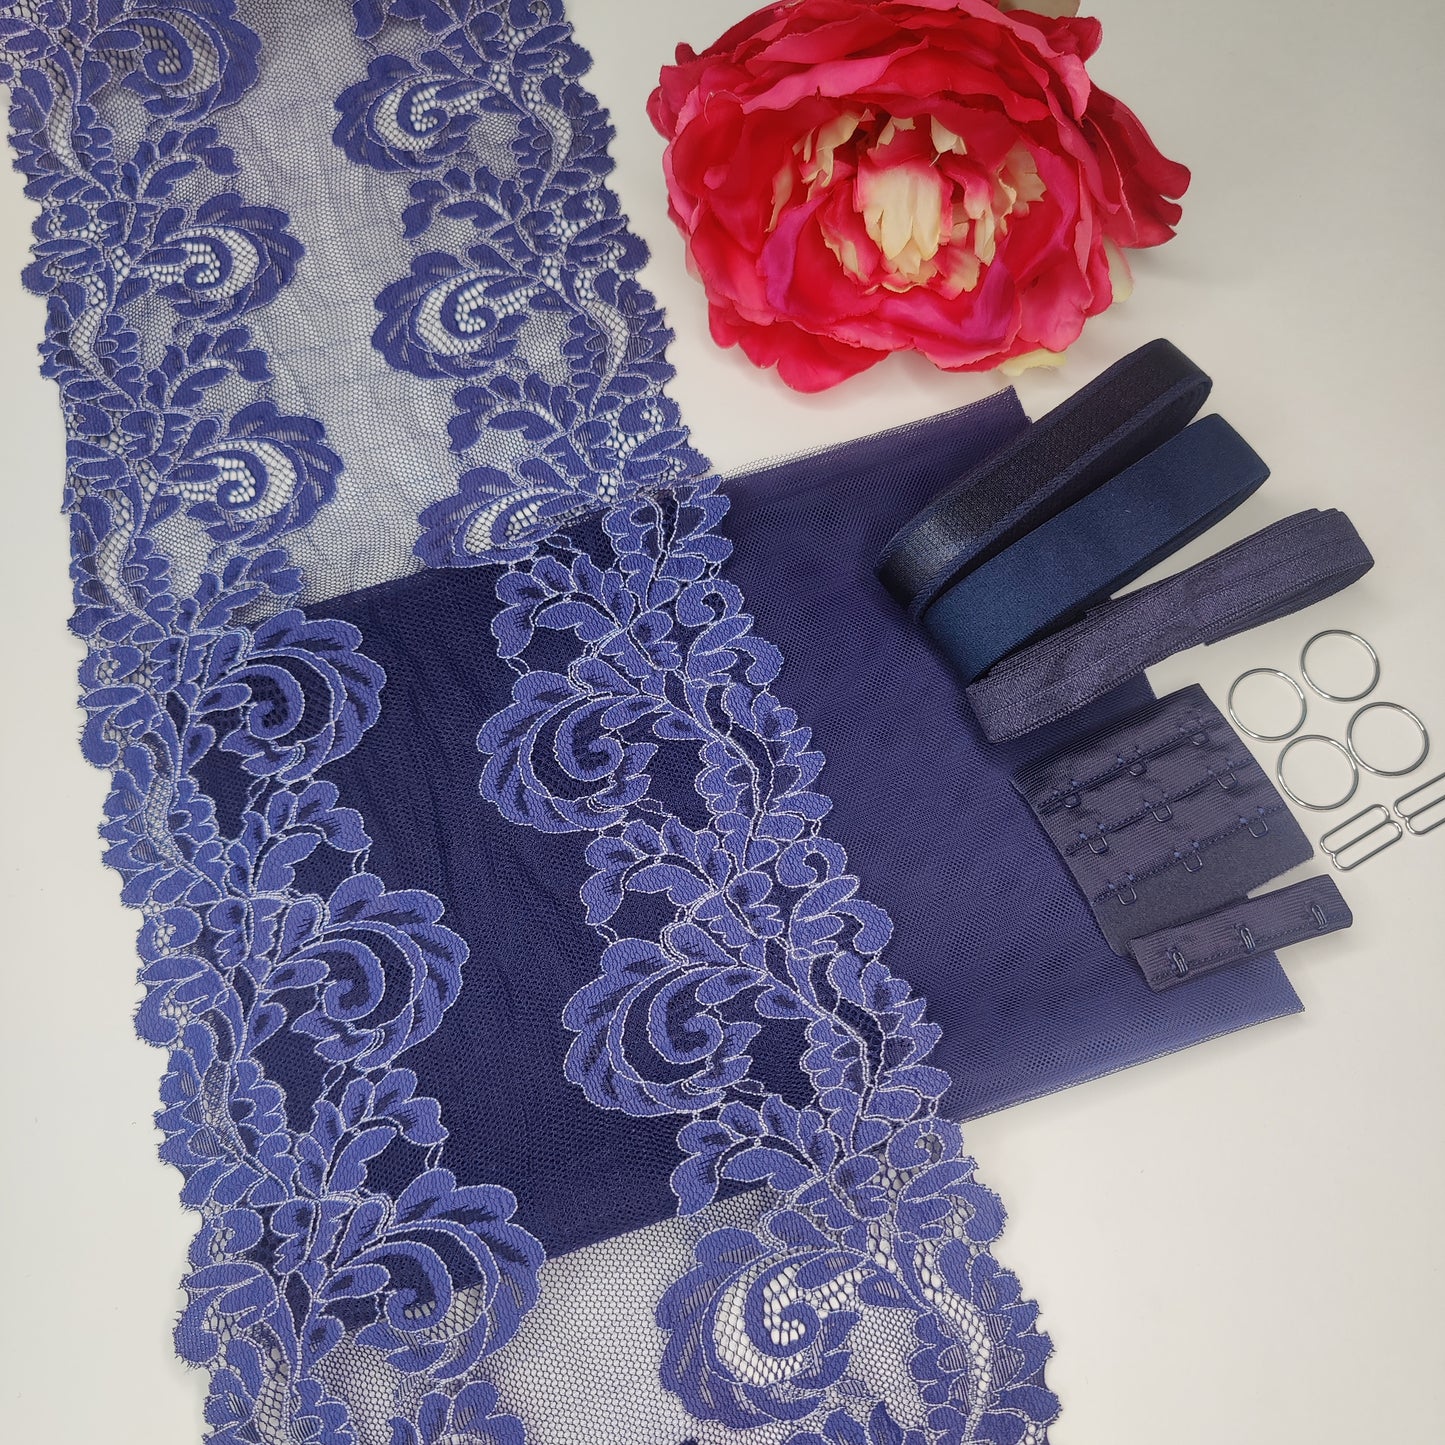 SAHAARA BRA sewing package with <tc>lace</tc>. View C: Full lace. Midnight blue